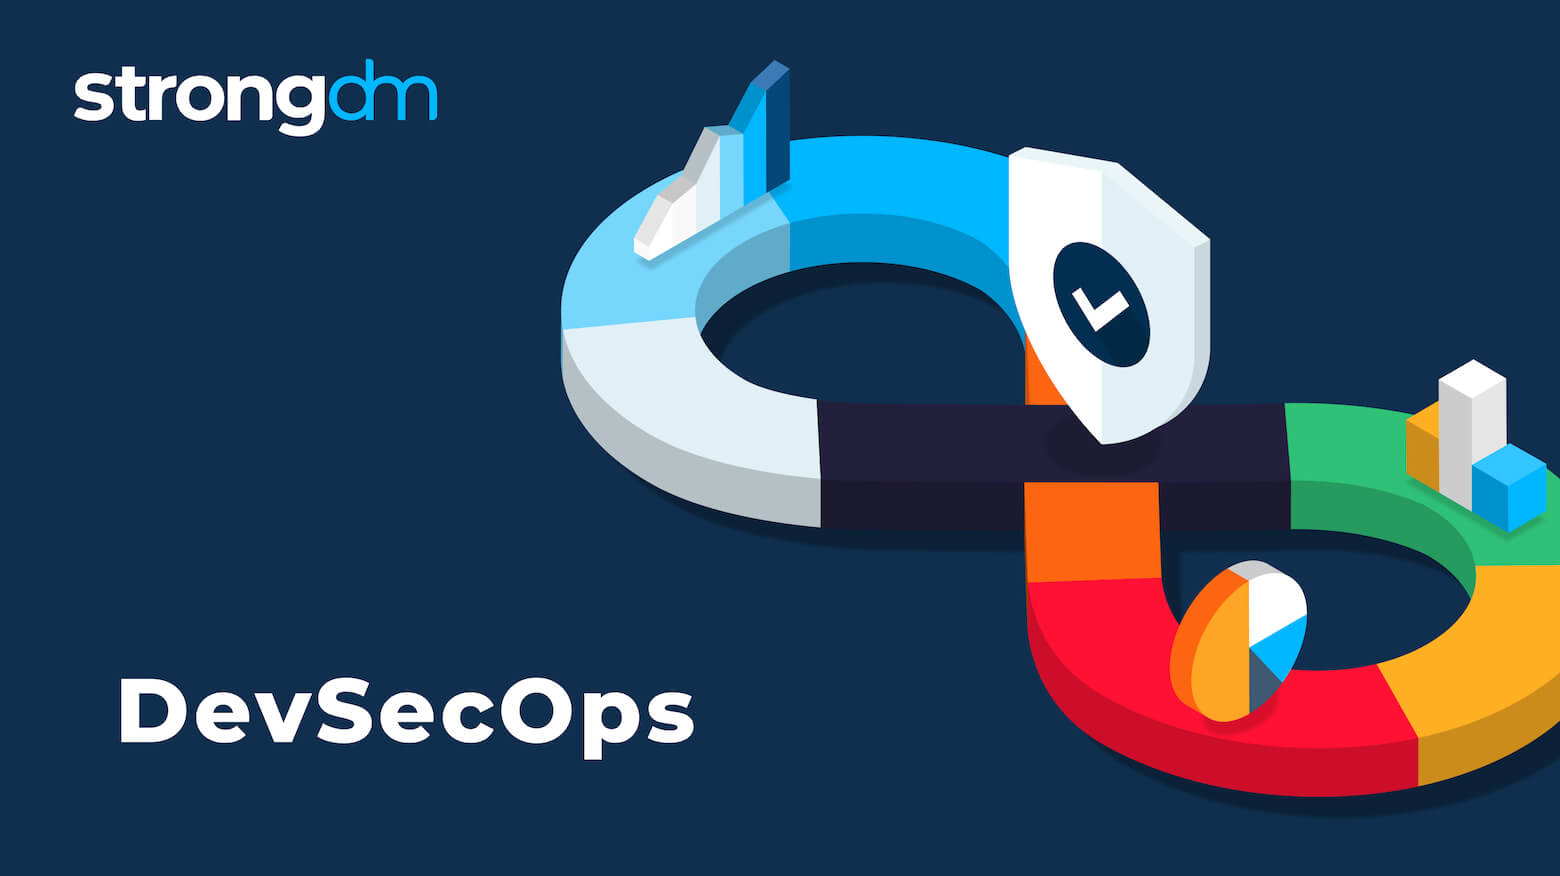 30+ DevSecOps Statistics You Should Know in 2023